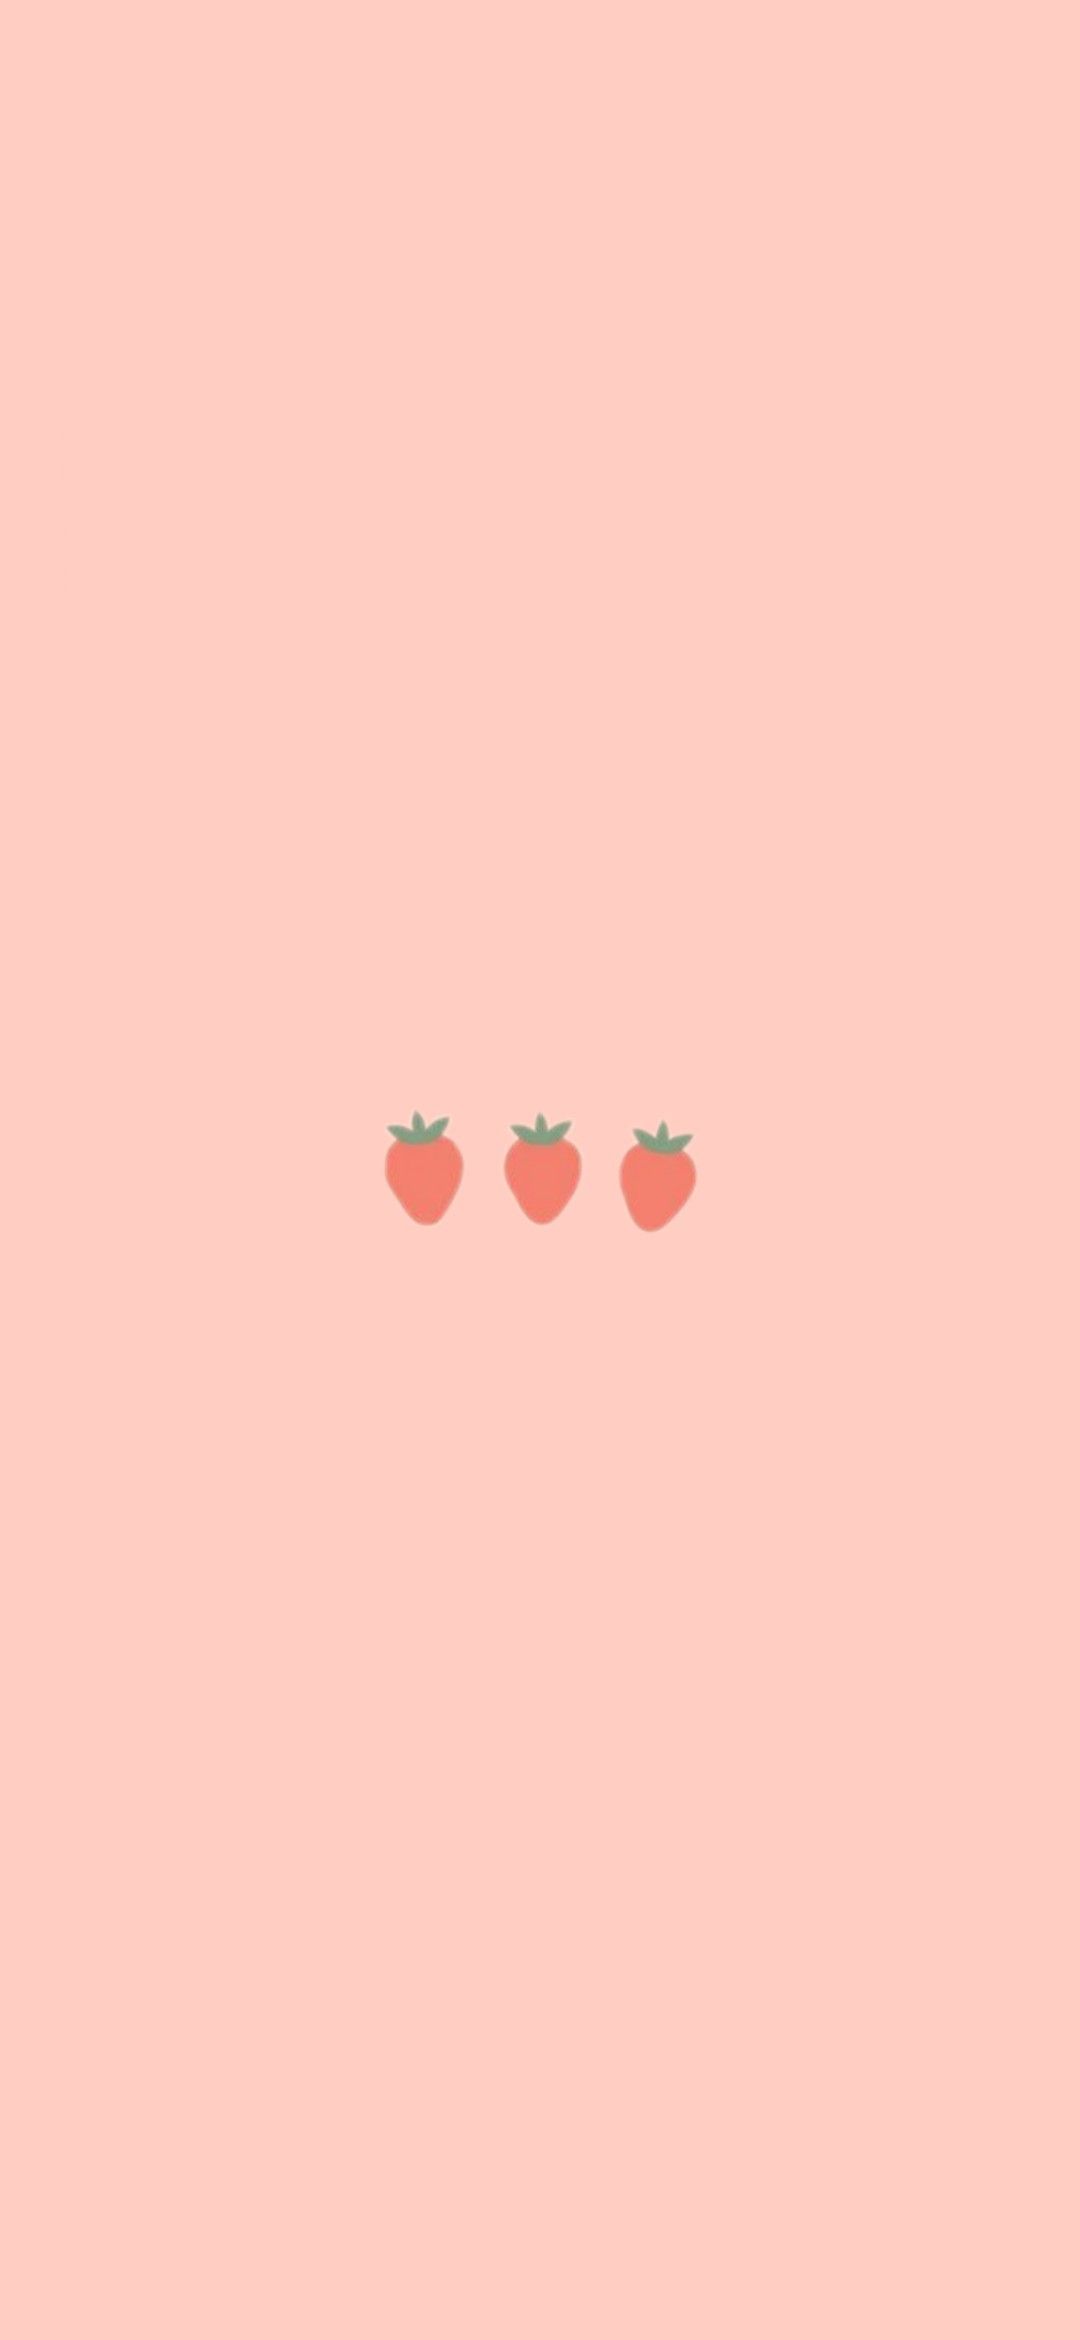 Strawberry Milk Aesthetic Wallpapers Wallpaper Cave A collection of the top 44 strawberry milk wallpapers and backgrounds available for download for free. strawberry milk aesthetic wallpapers